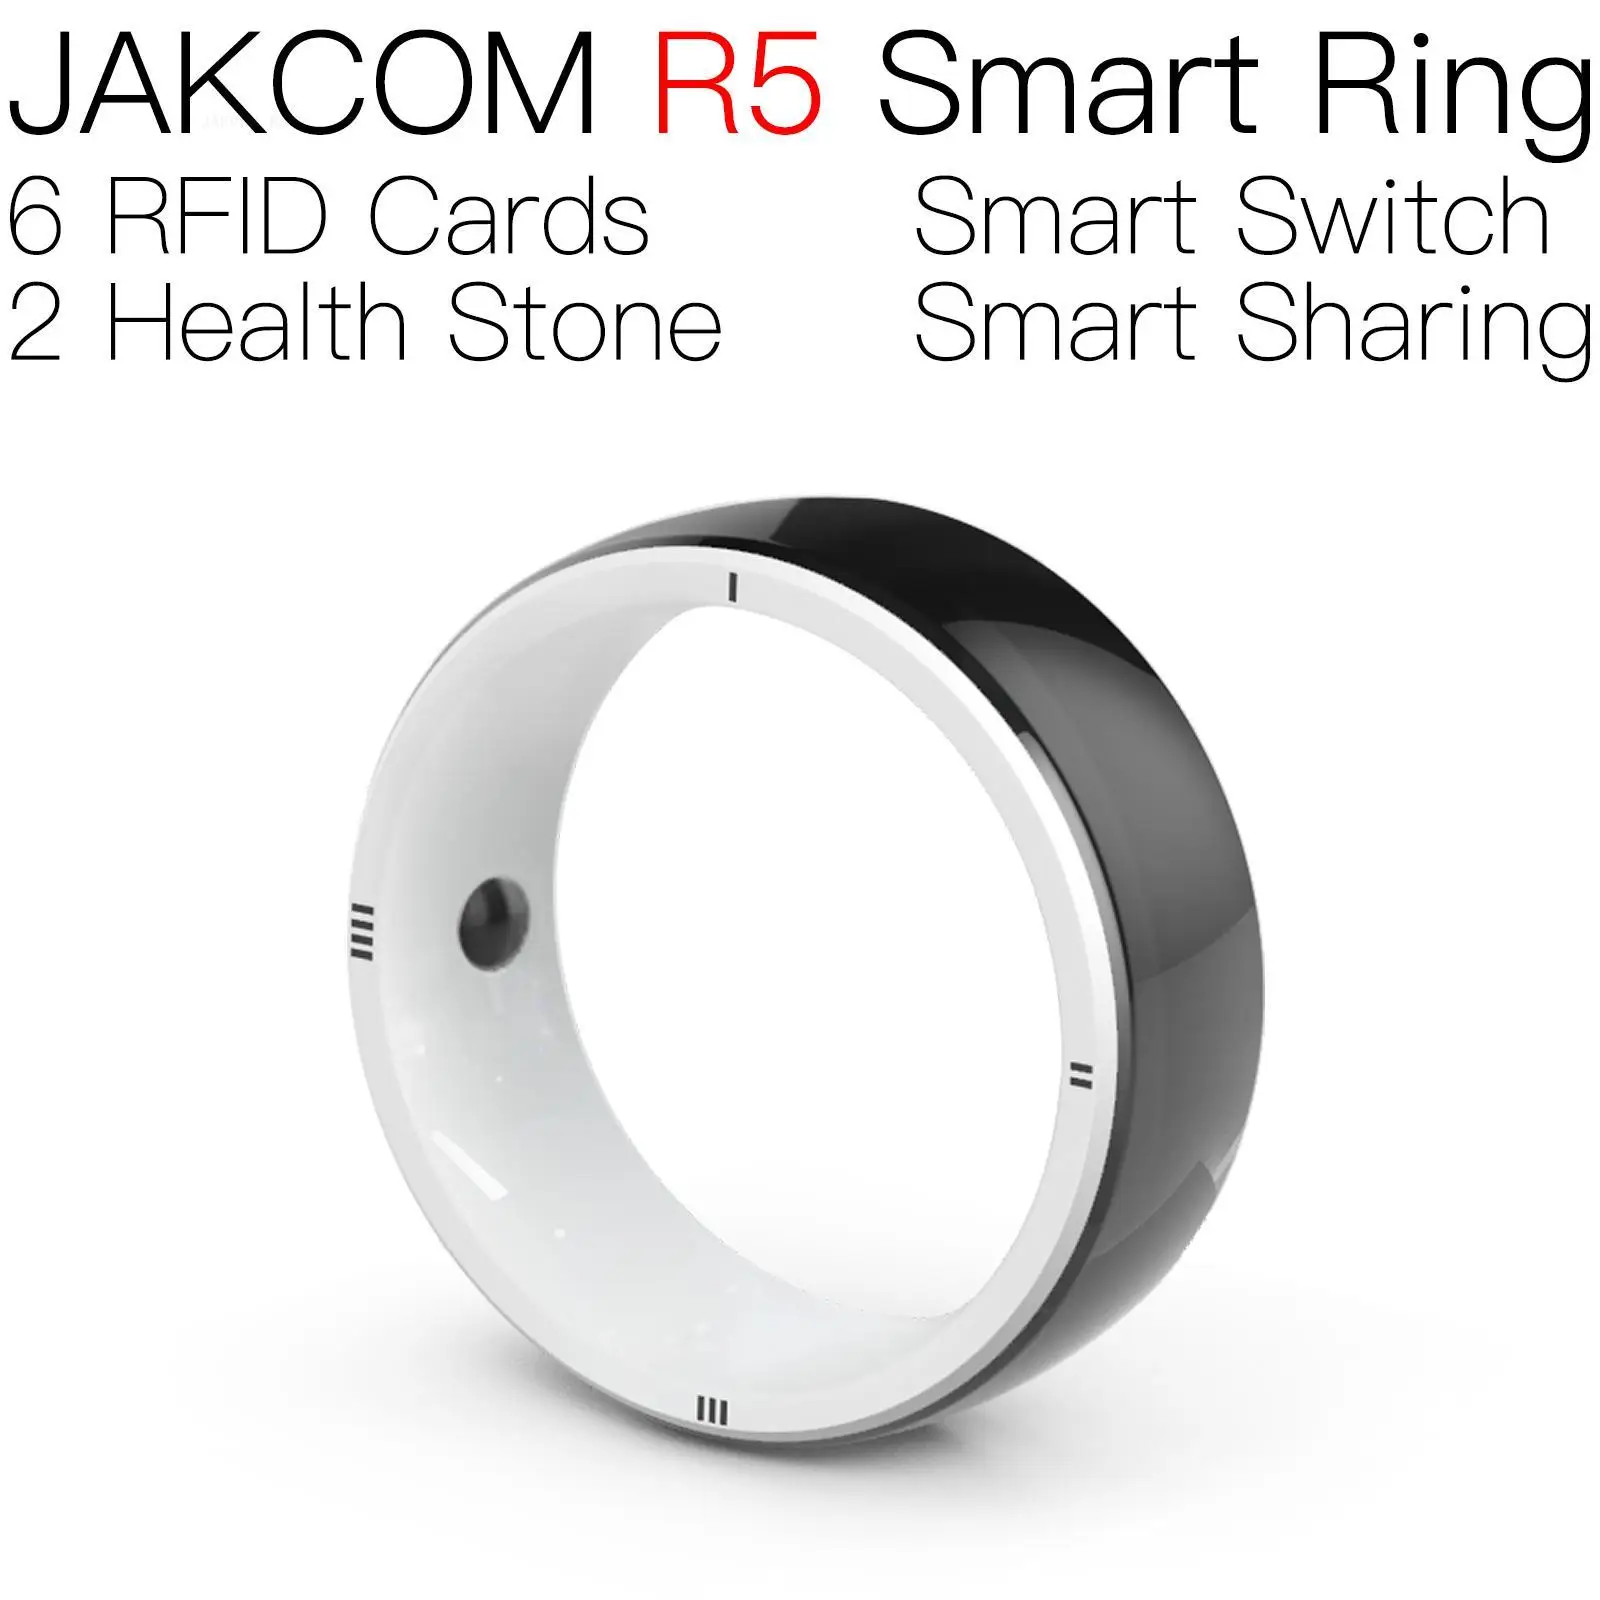 

JAKCOM R5 Smart Ring Best gift with bracelet piscine rfid label washable uid changeable animal jewelry tag chameleon nfc